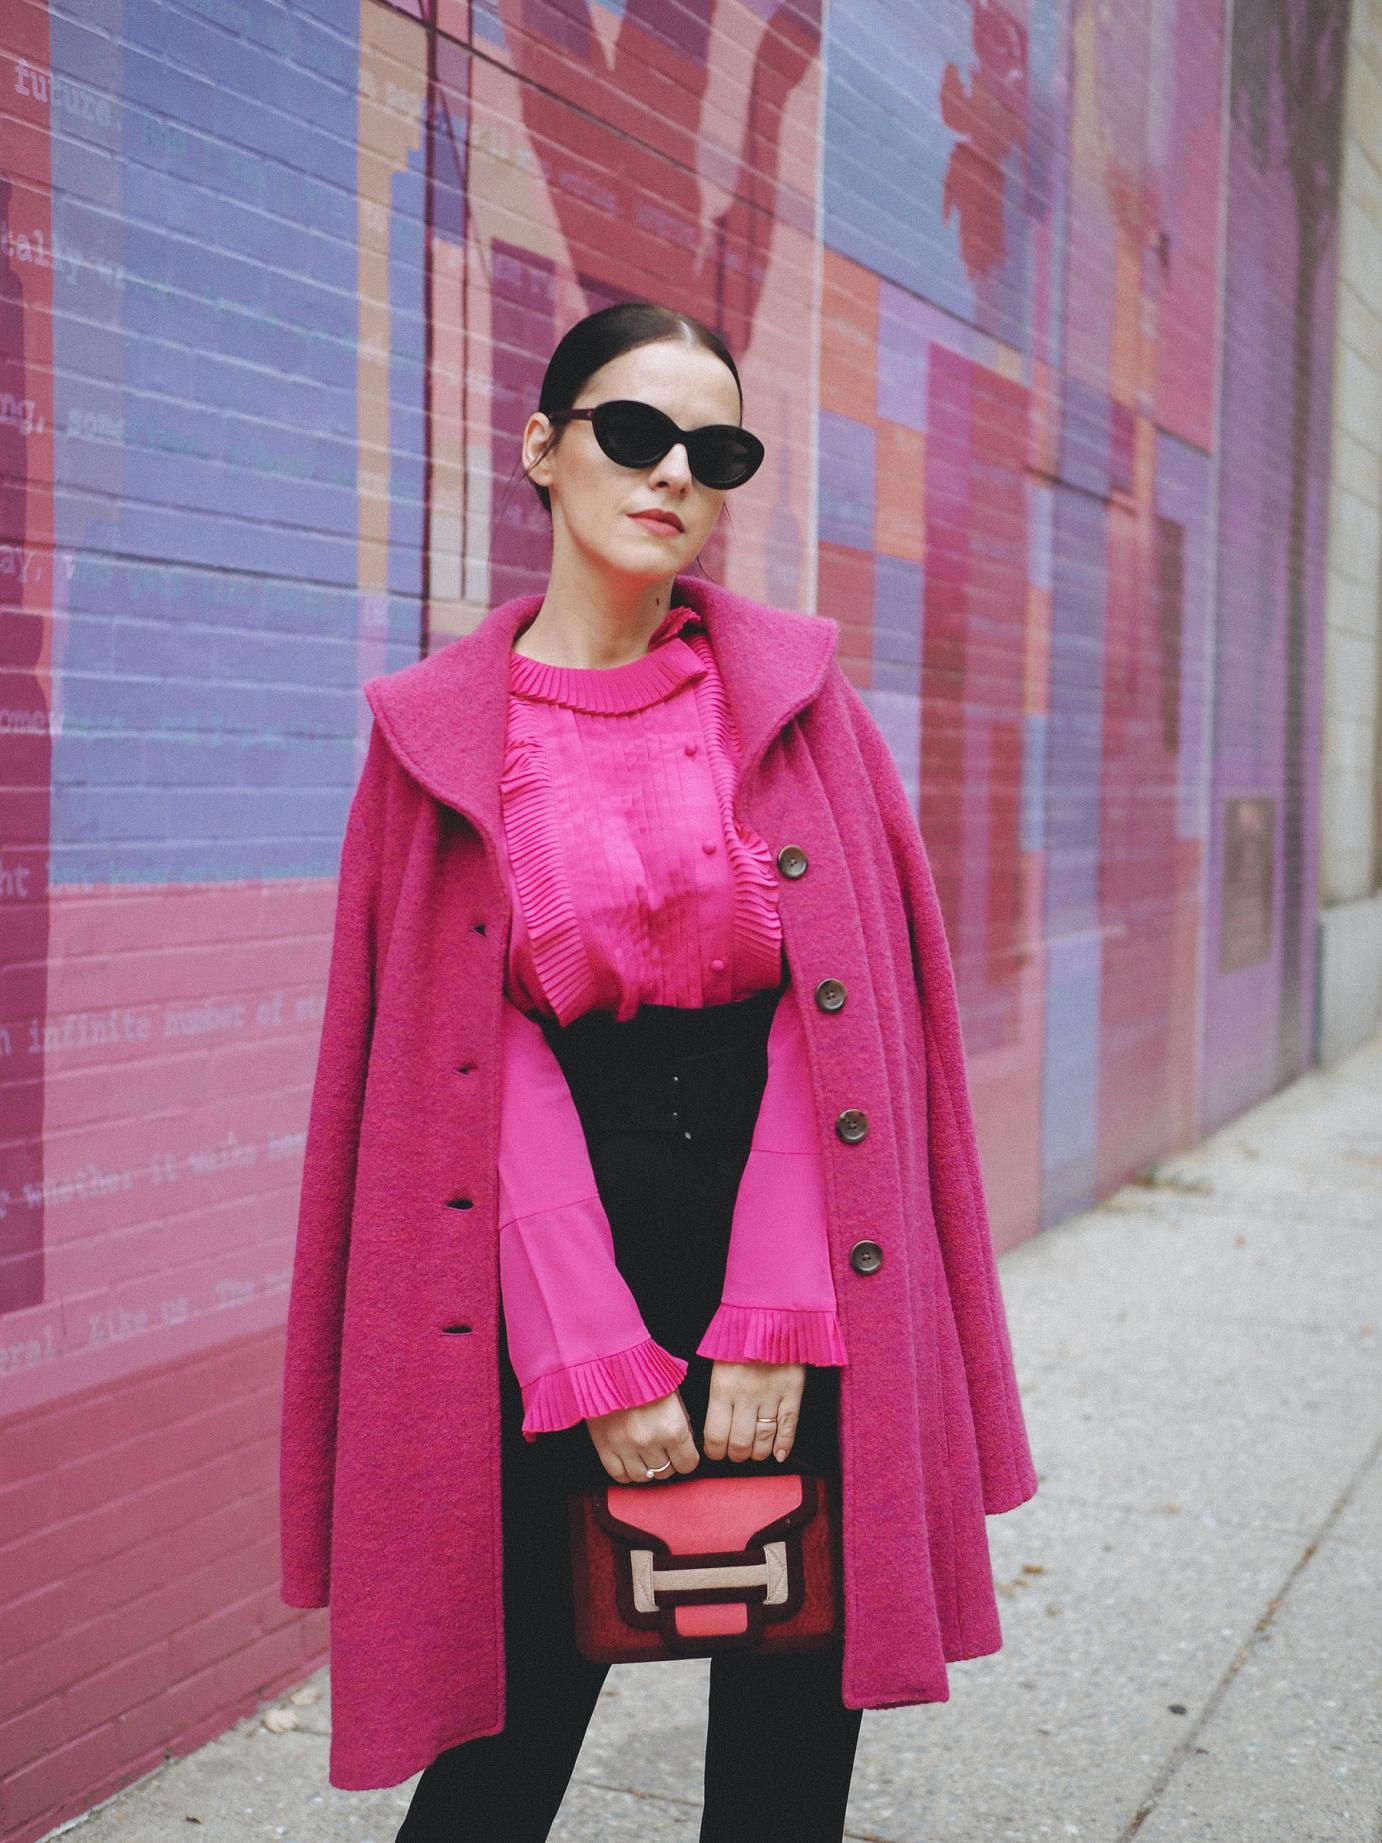 Another popping mix of color is in full display today. This time Fuchsia is the main color and I have not one, but 3 pieces (if I count the hints from the bag, I have 4) in this color. The coat is a vintage piece, old in my closet. I am happy to wear it again in a mix with this black pair of belted high trousers and this ruffled shirt. It's quite a "loud" color combination so there's no need for more accessories if you ask me!